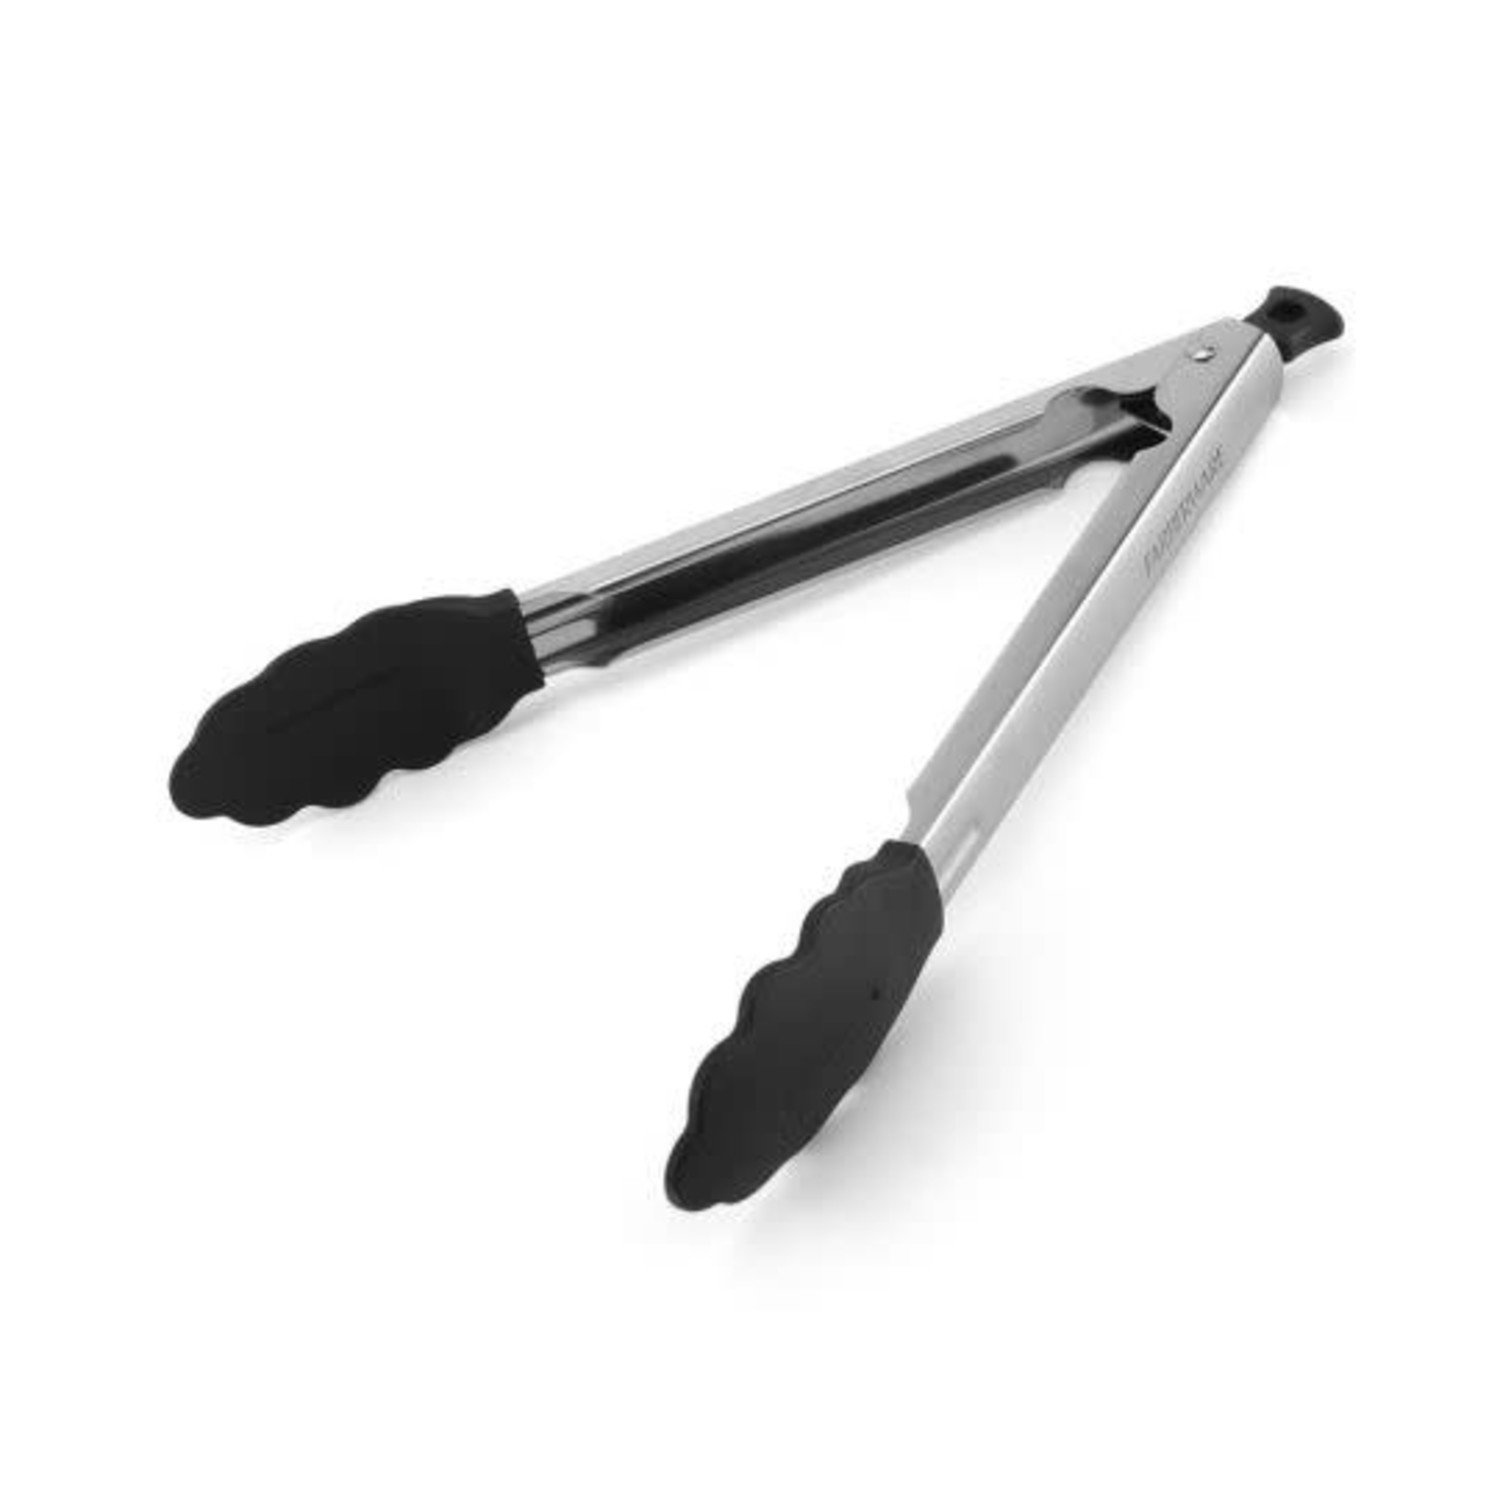 Bistro Small Kitchen Tongs, Black, Sold by at Home